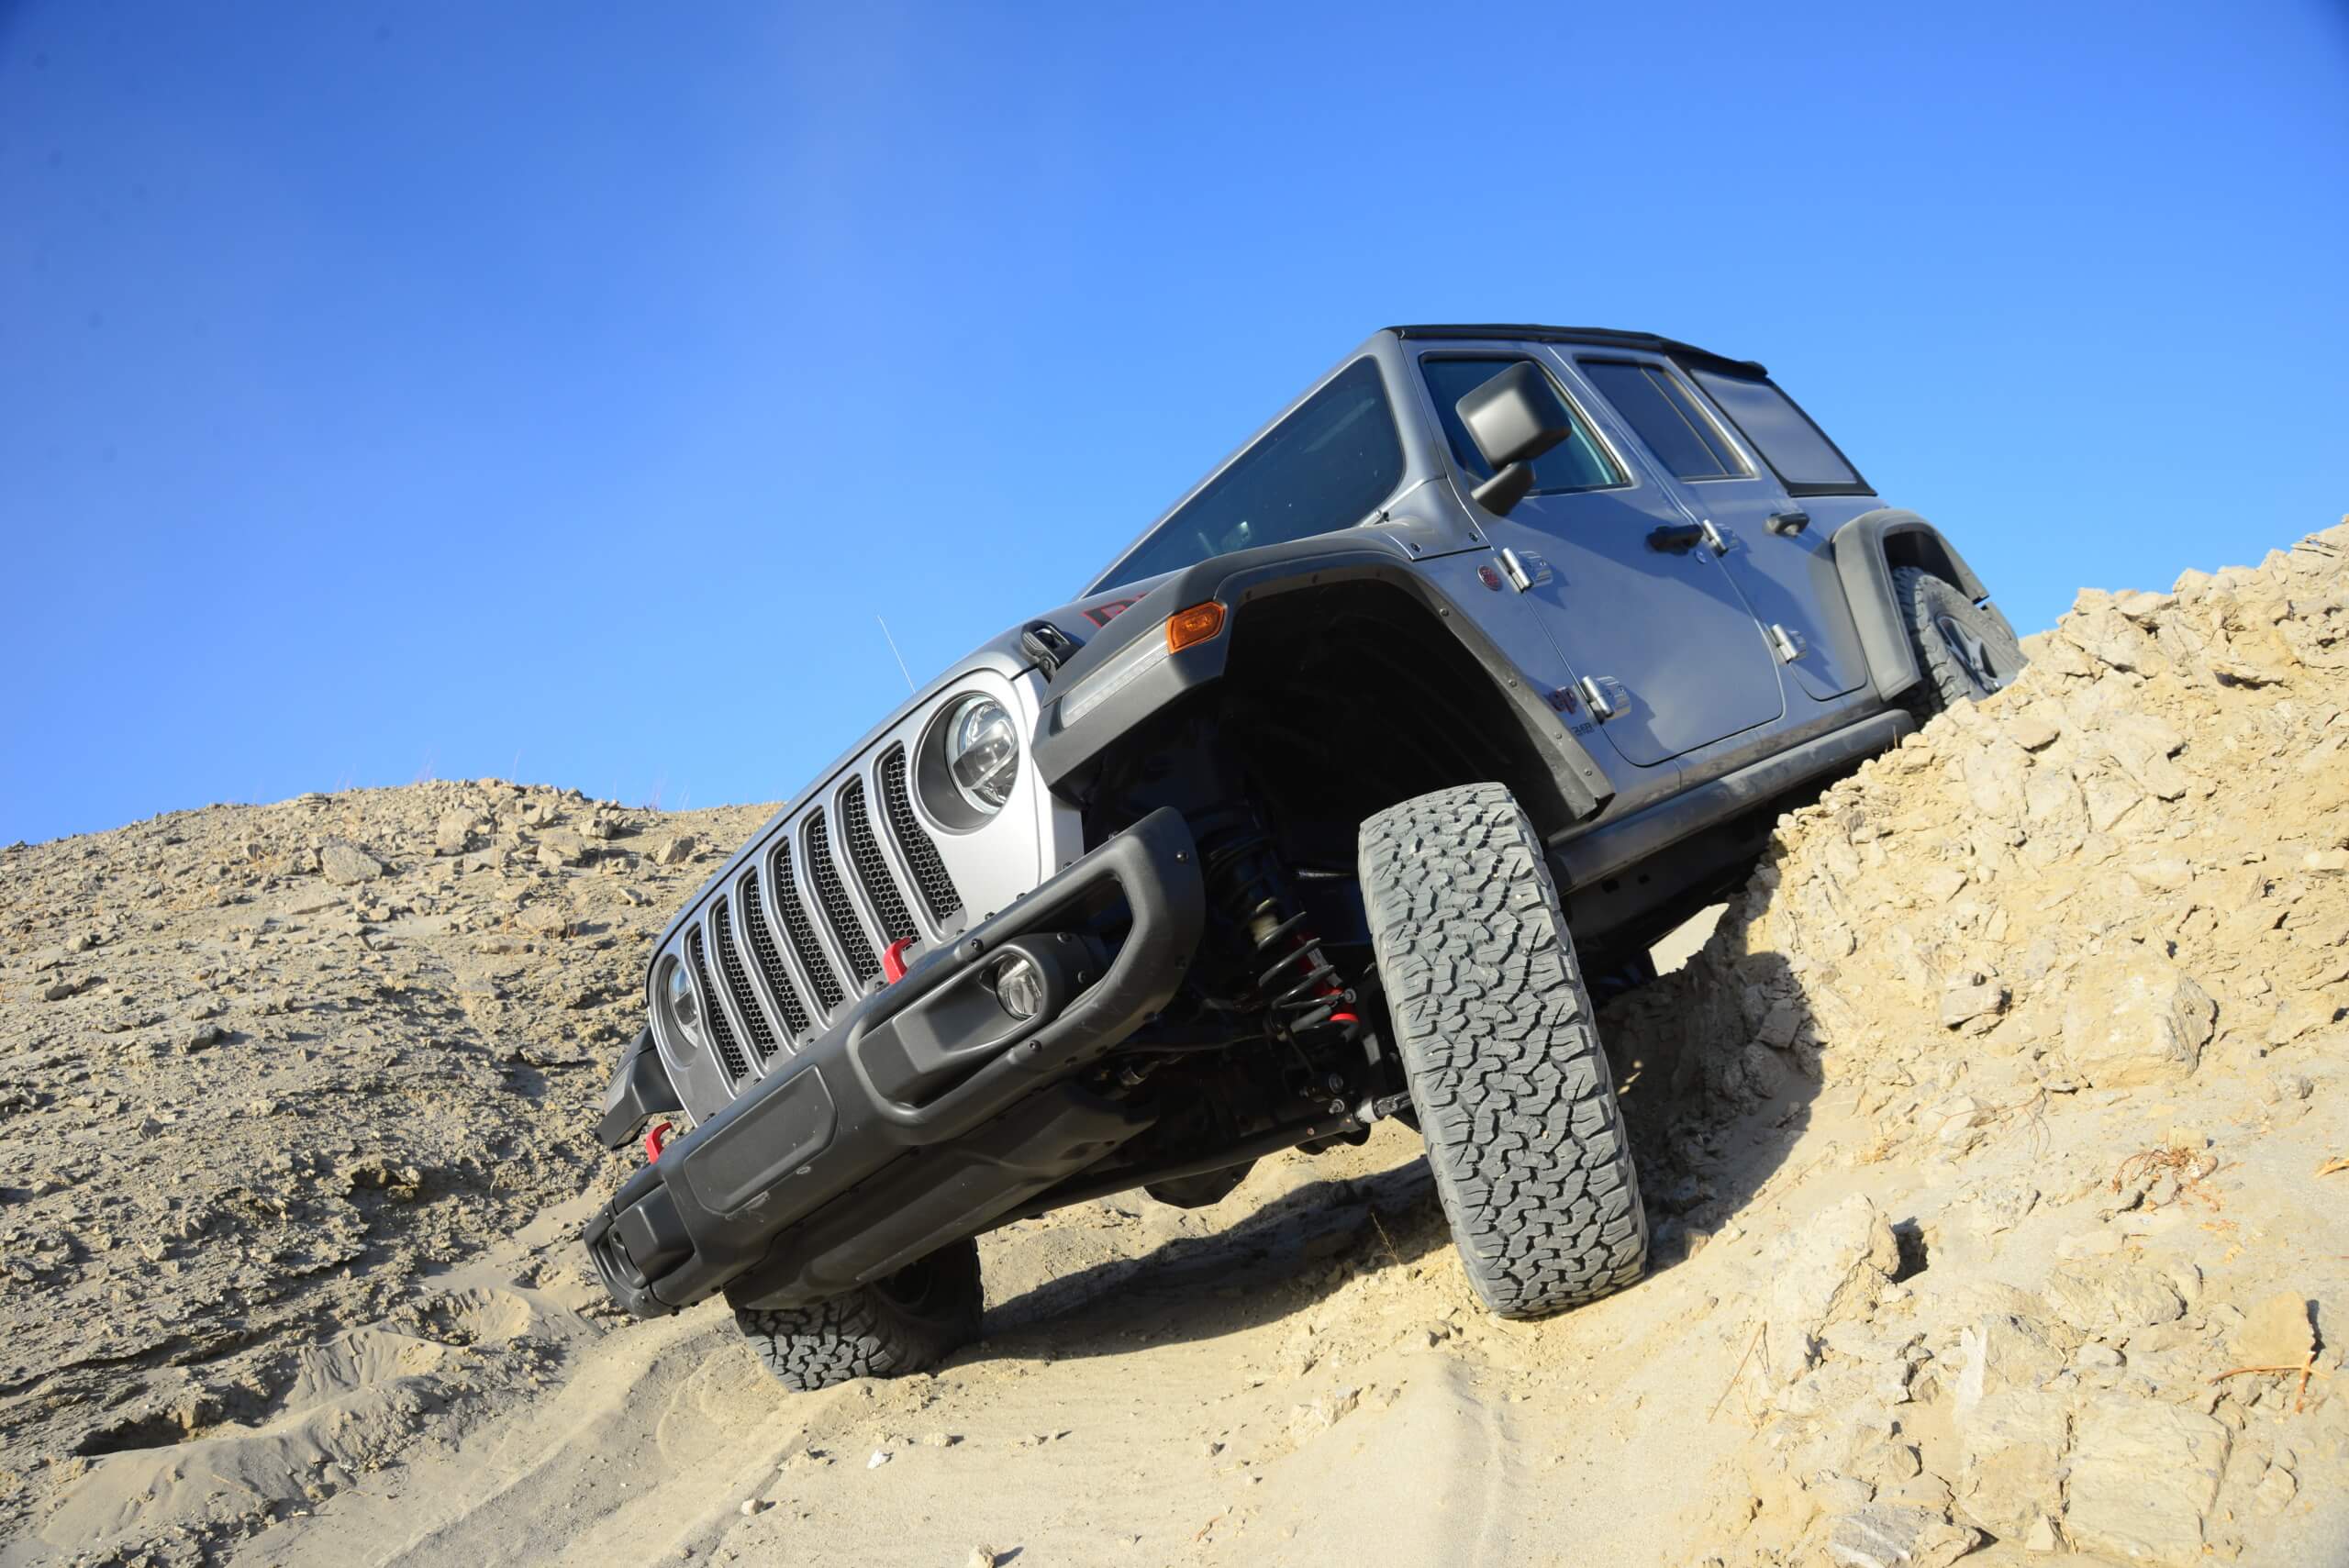 01 2018 Jeep Wrangler JL Unlimited Rubicon Crawling lead image